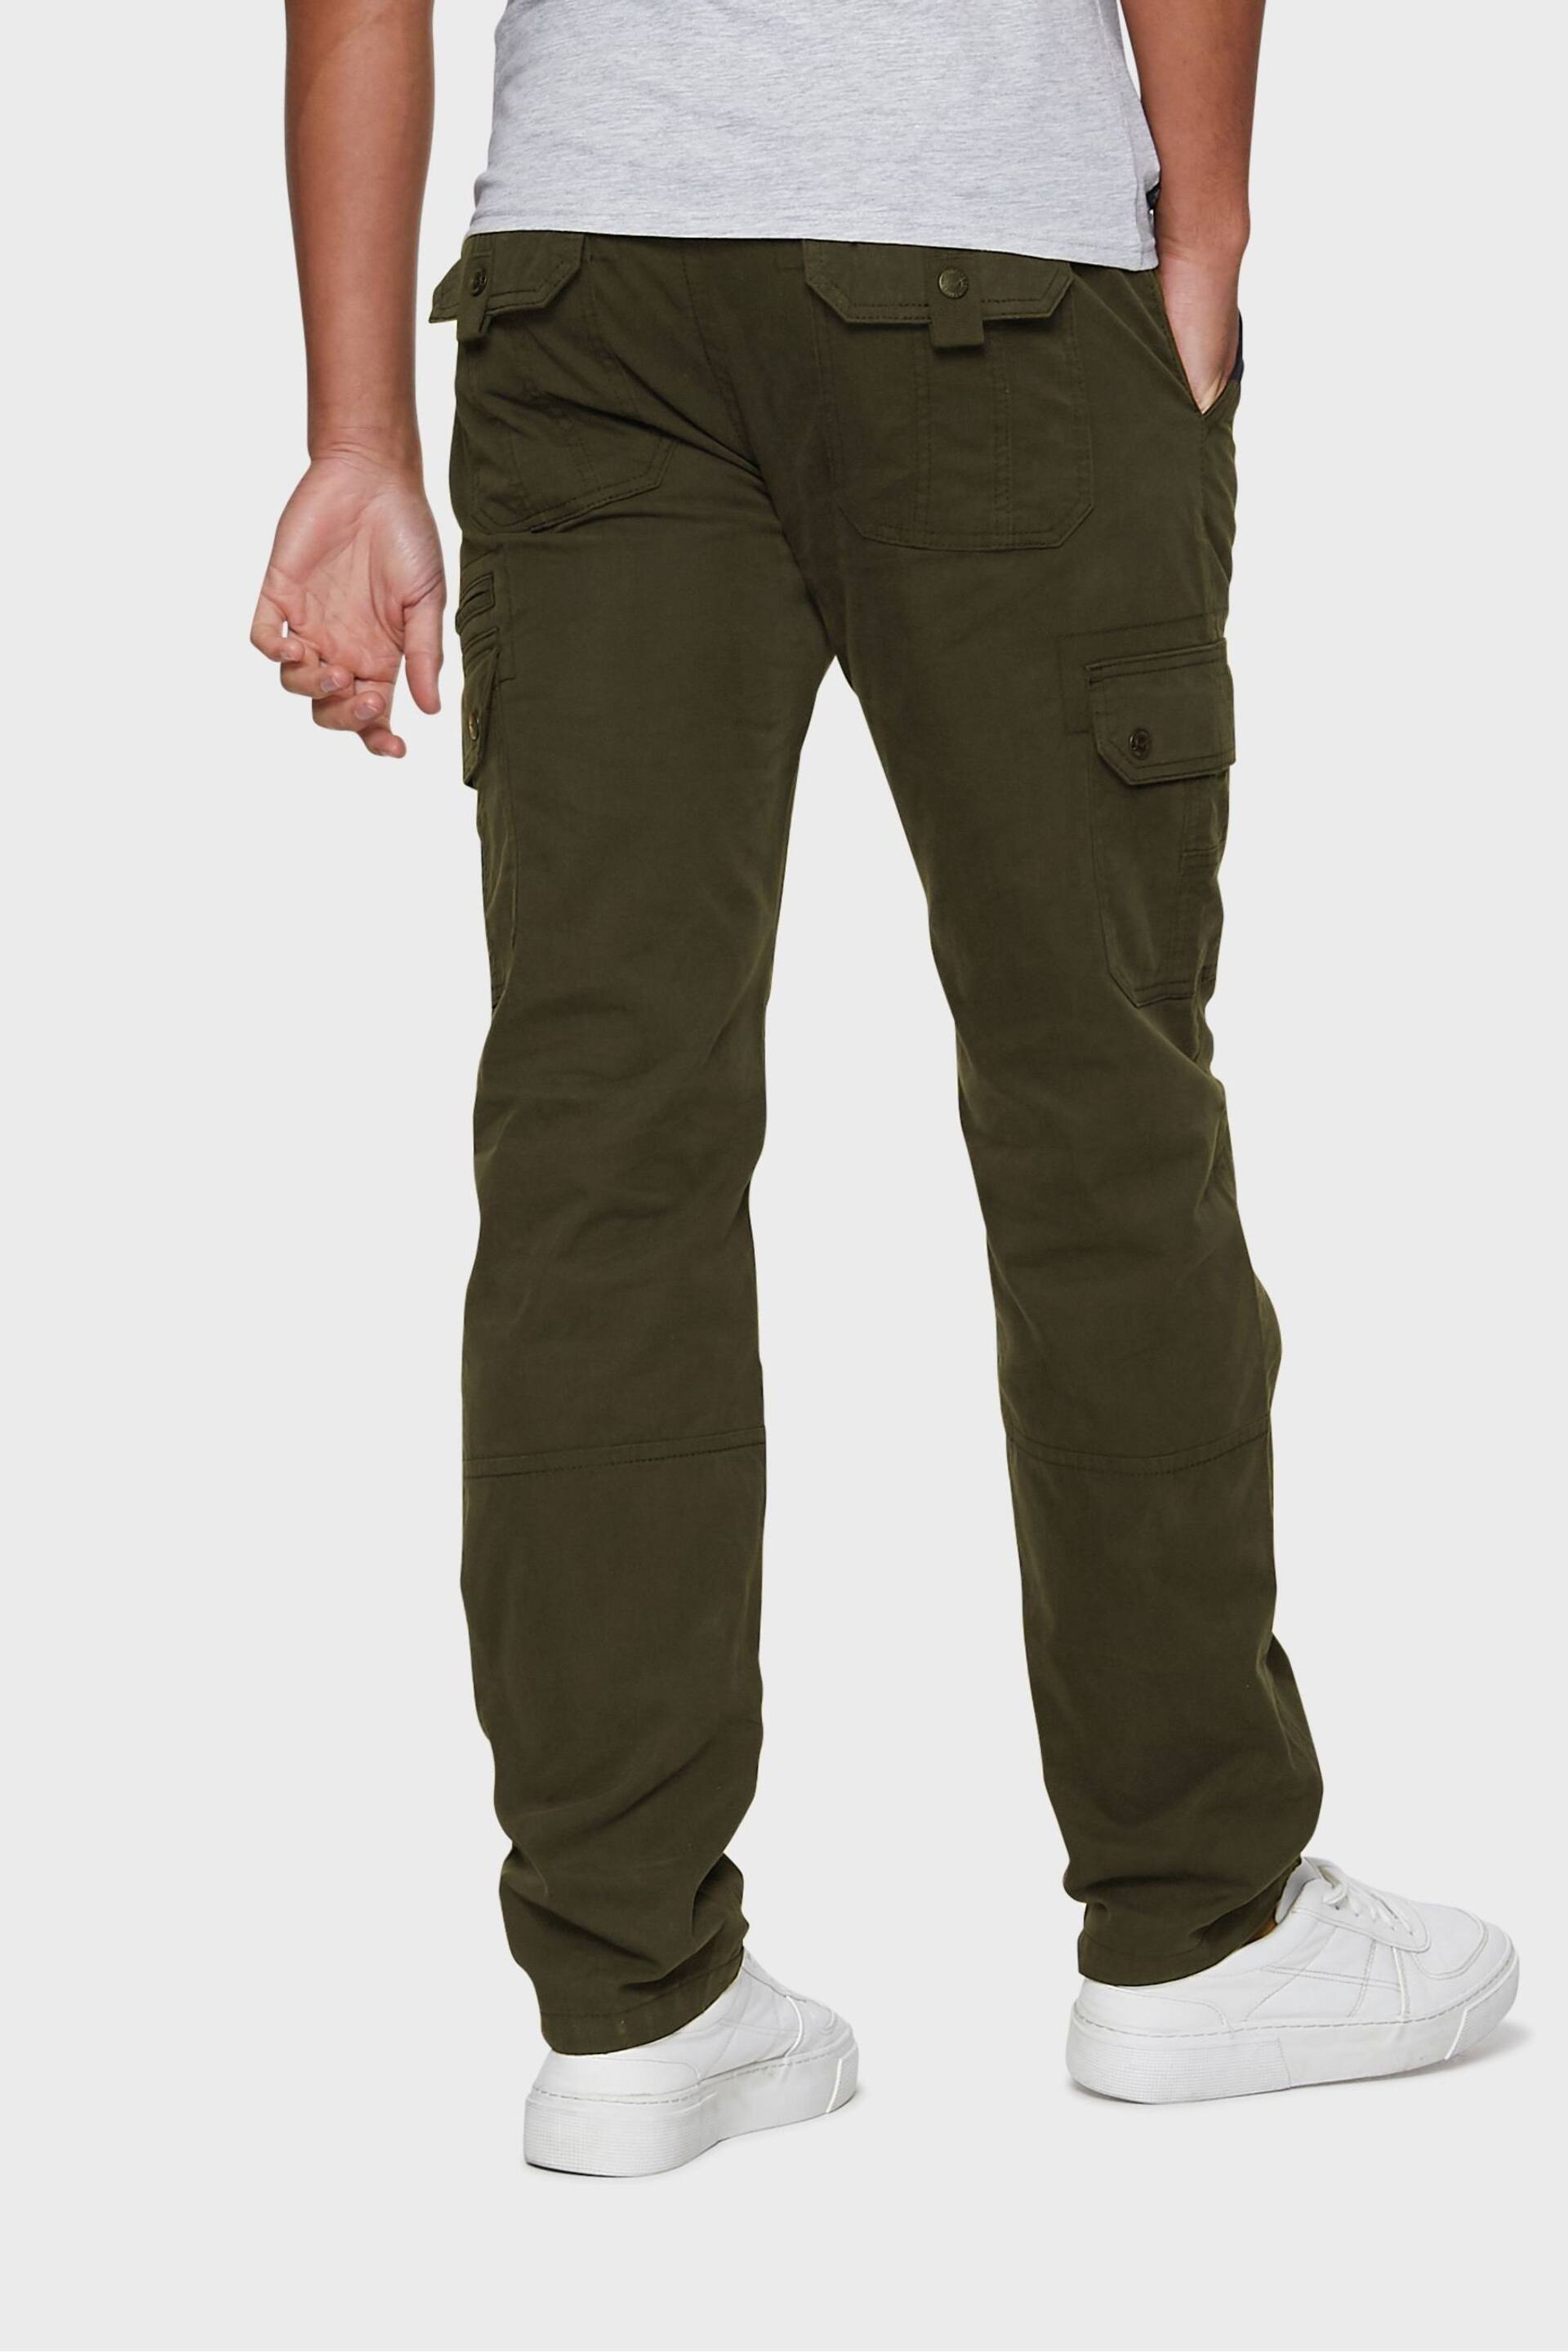 Threadbare Green Cotton Blend Belted Cargo Trousers - Image 2 of 4